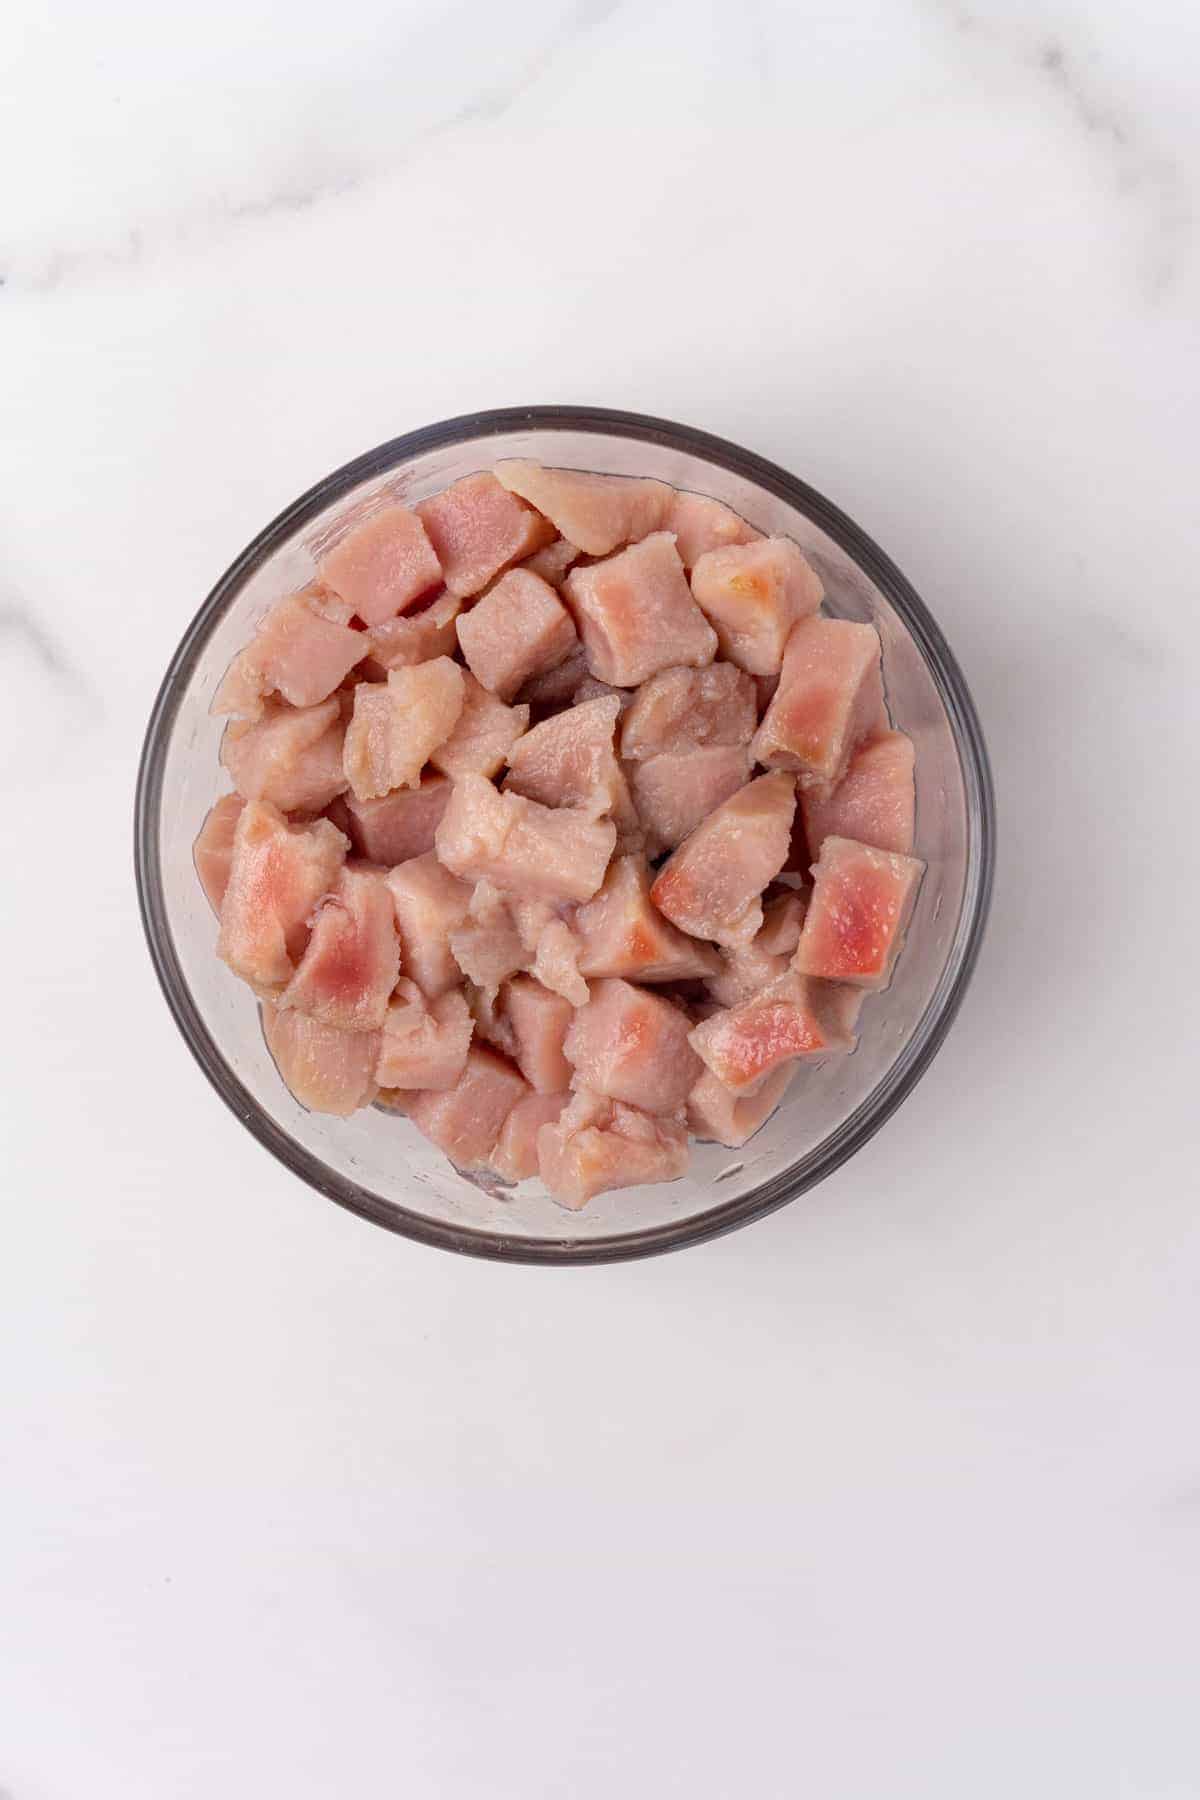 Tuna pieces, soaked and drained, in a glass bowl, as seen from above on a white marble countertop